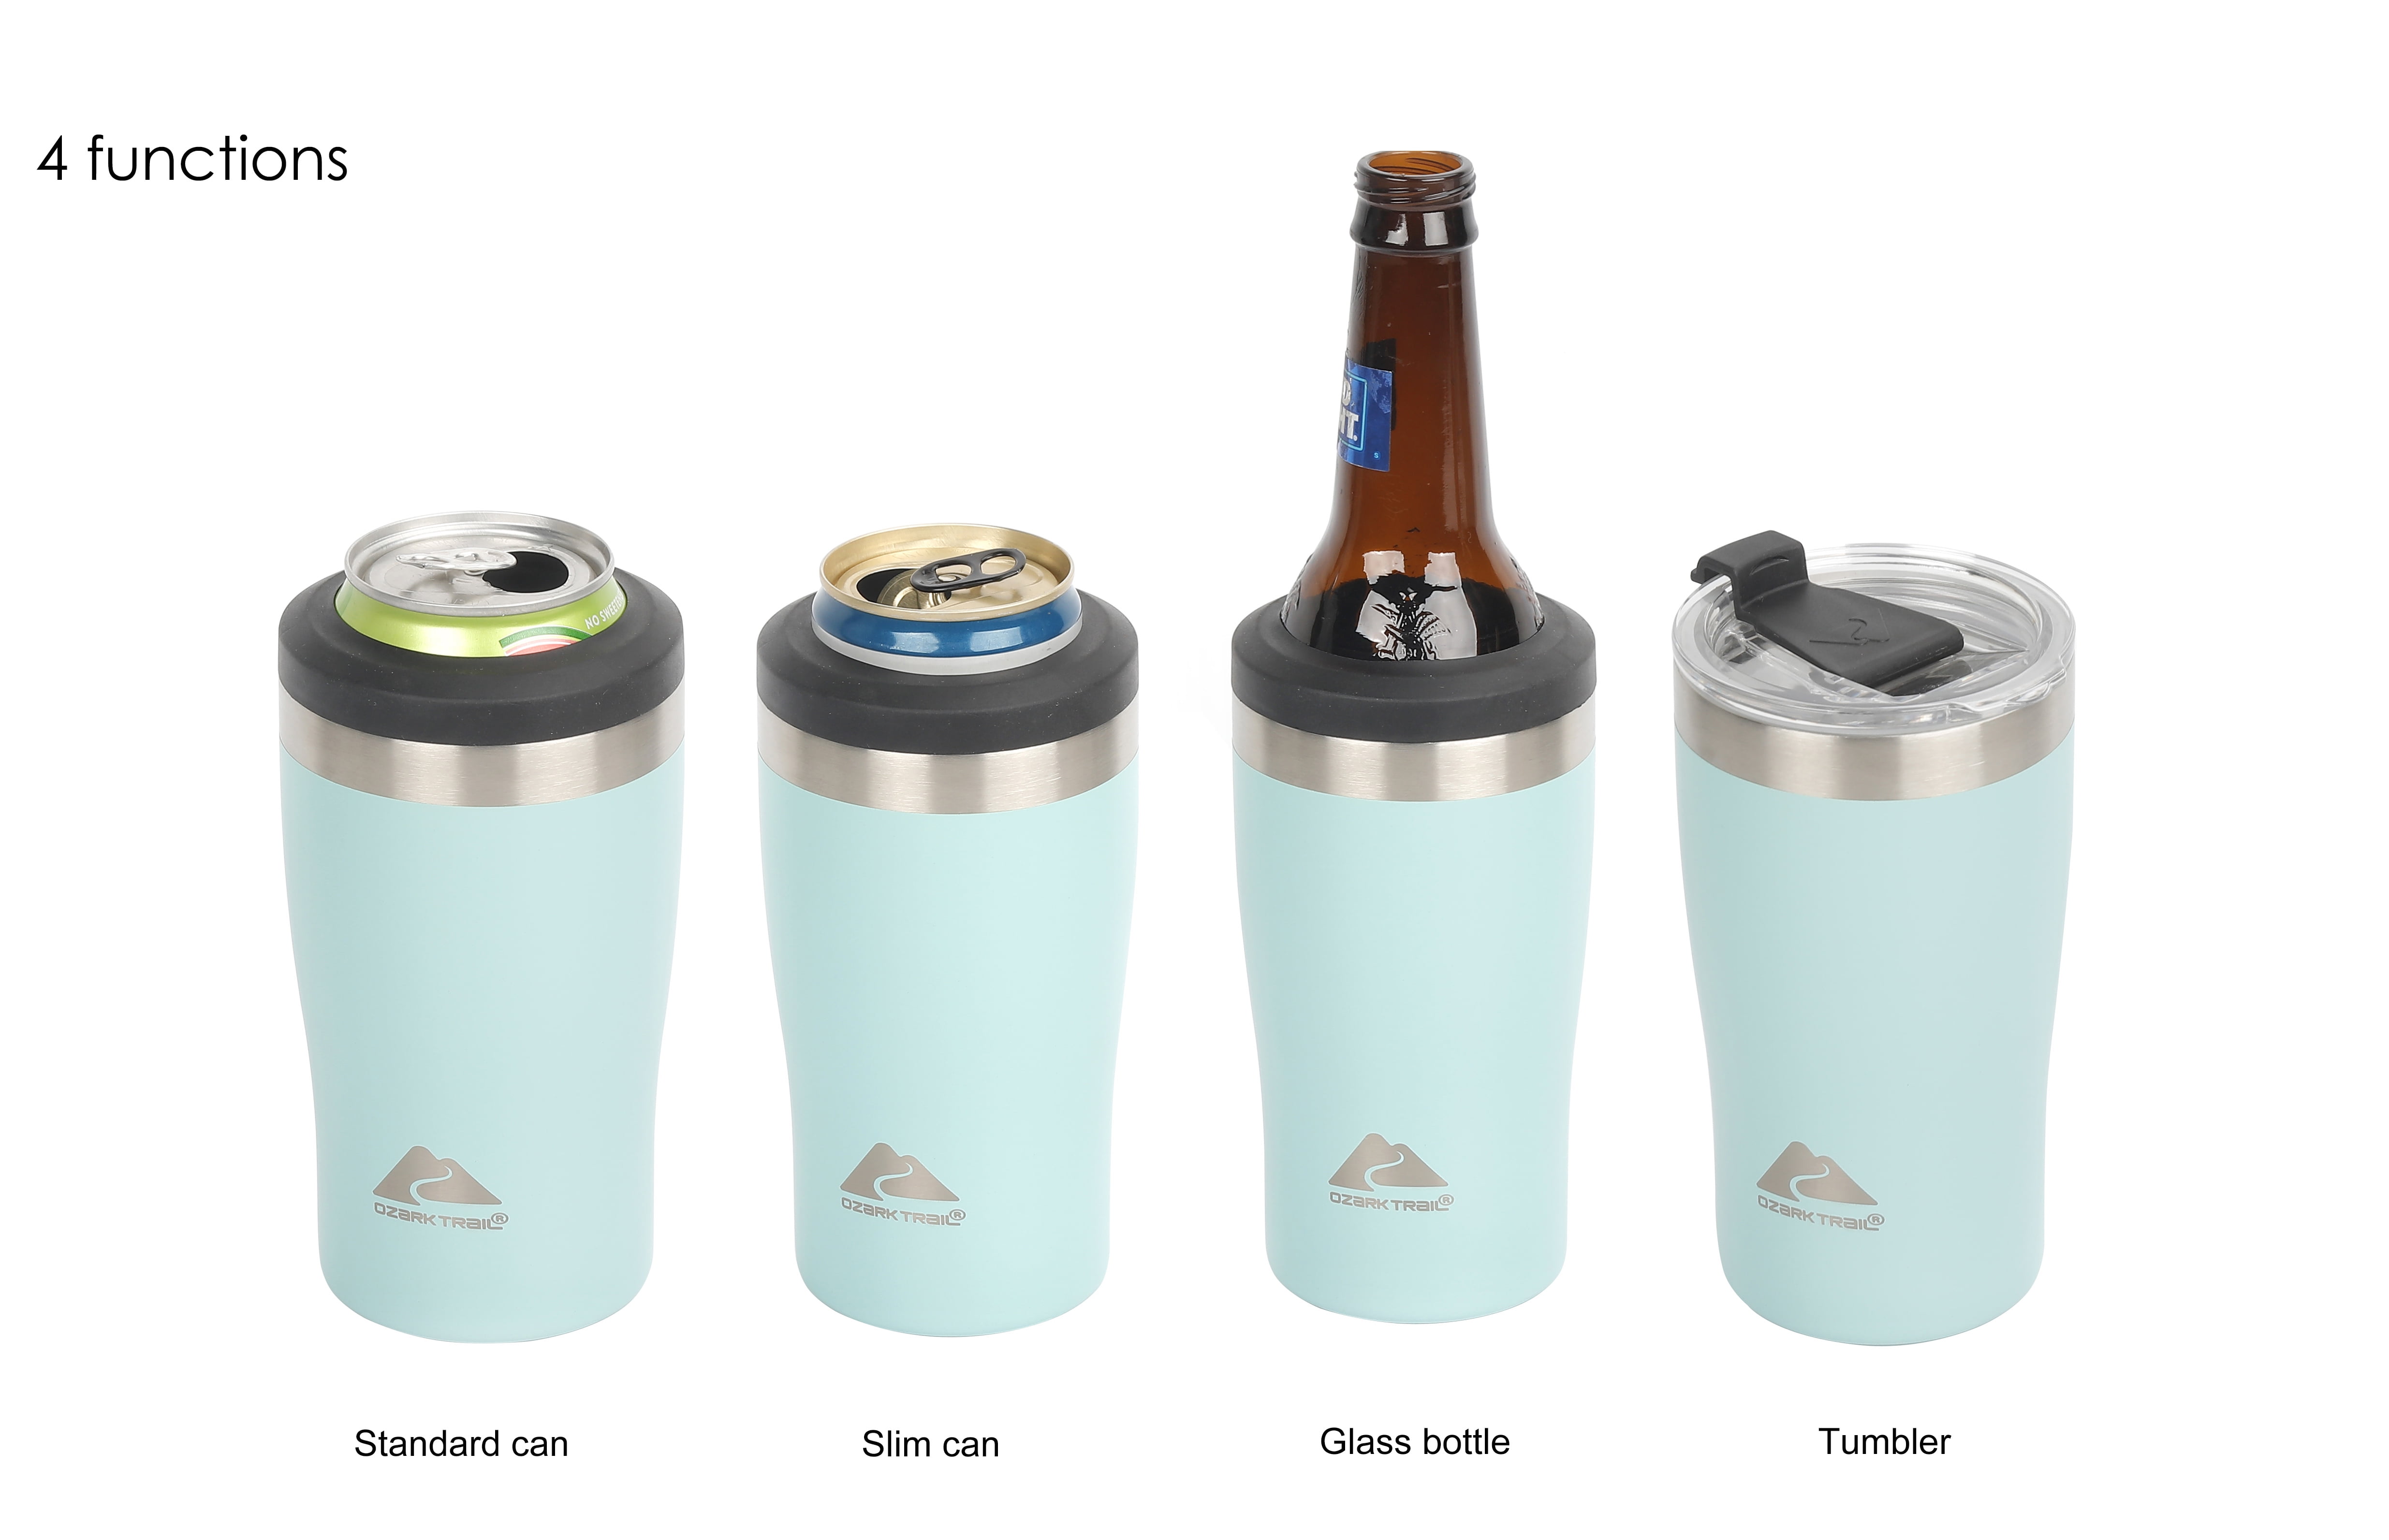 Thermos Vacuum Insulated 12-Oz Can Holder 4-pack for $24 (Reg. $30)